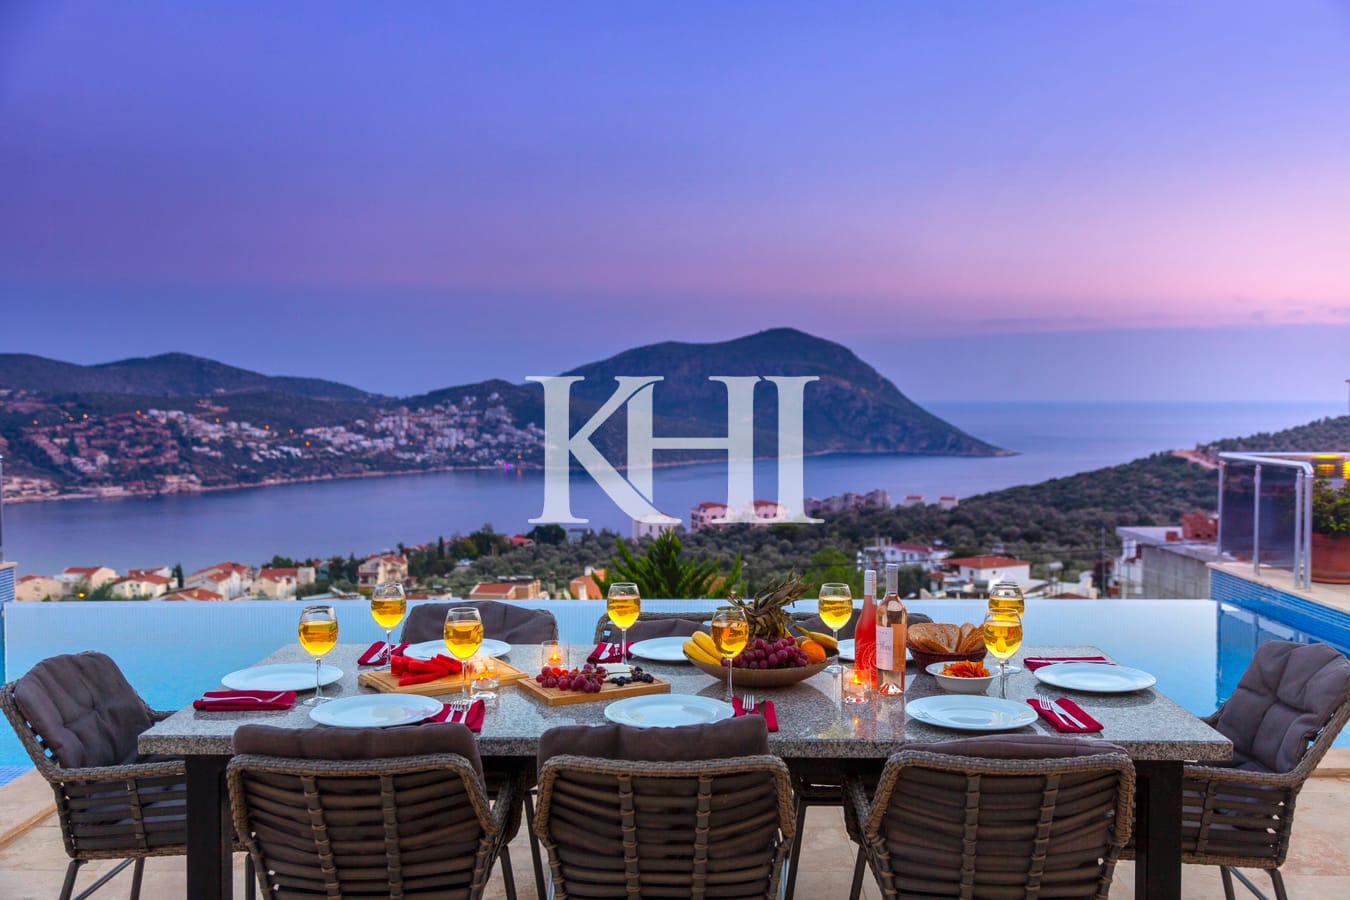 Detached Villa For Sale With Panoramic Kalkan View Slide Image 2